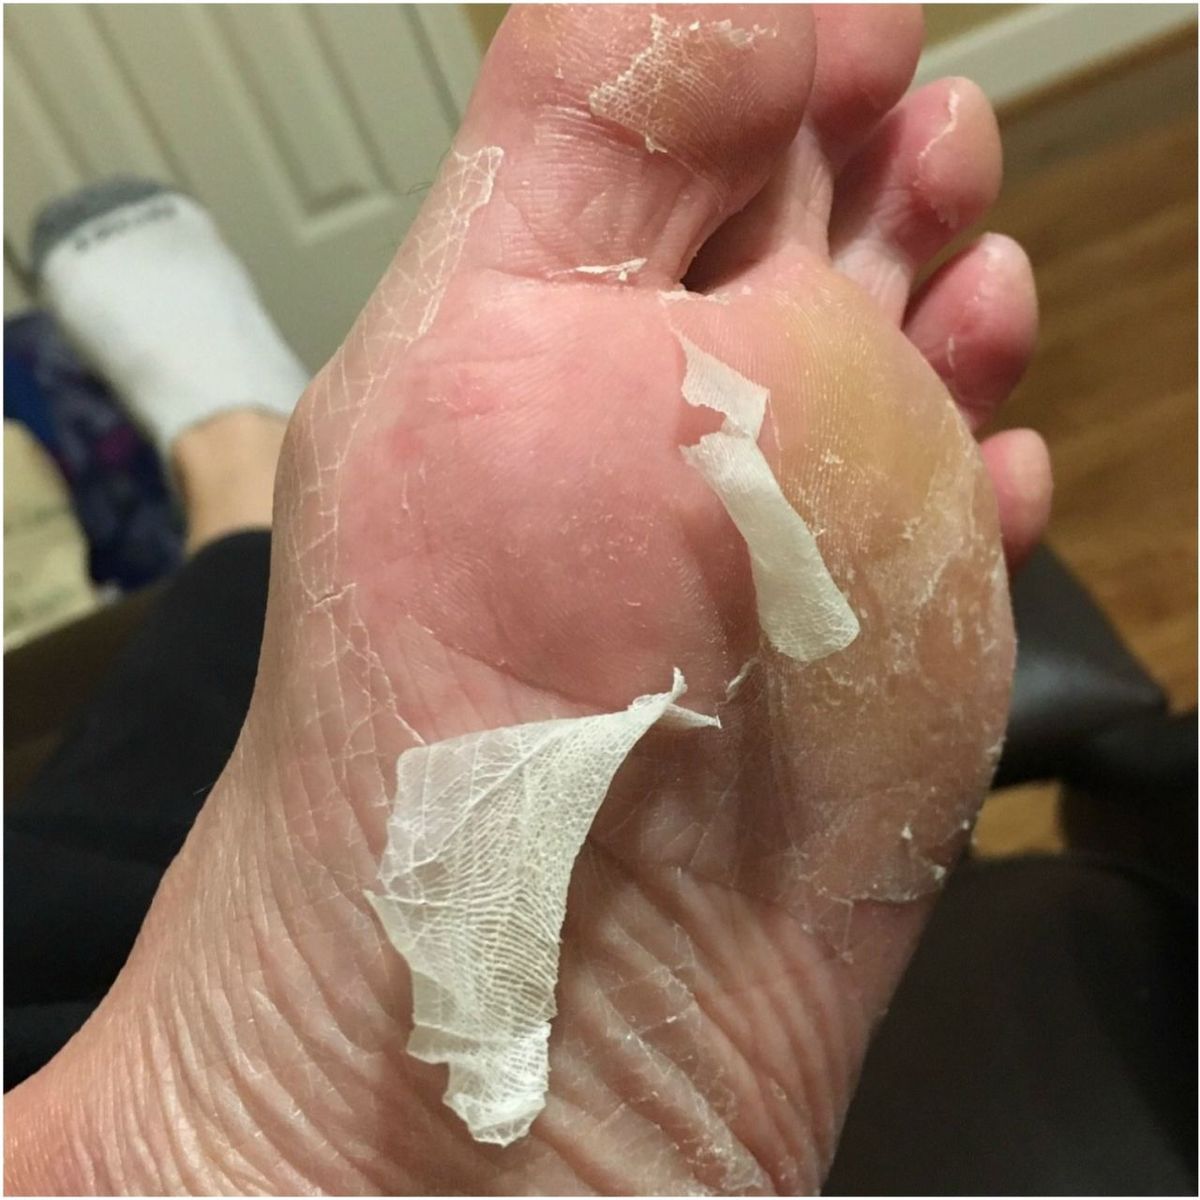 Does the Baby Foot Peel Live Up to the Hype?